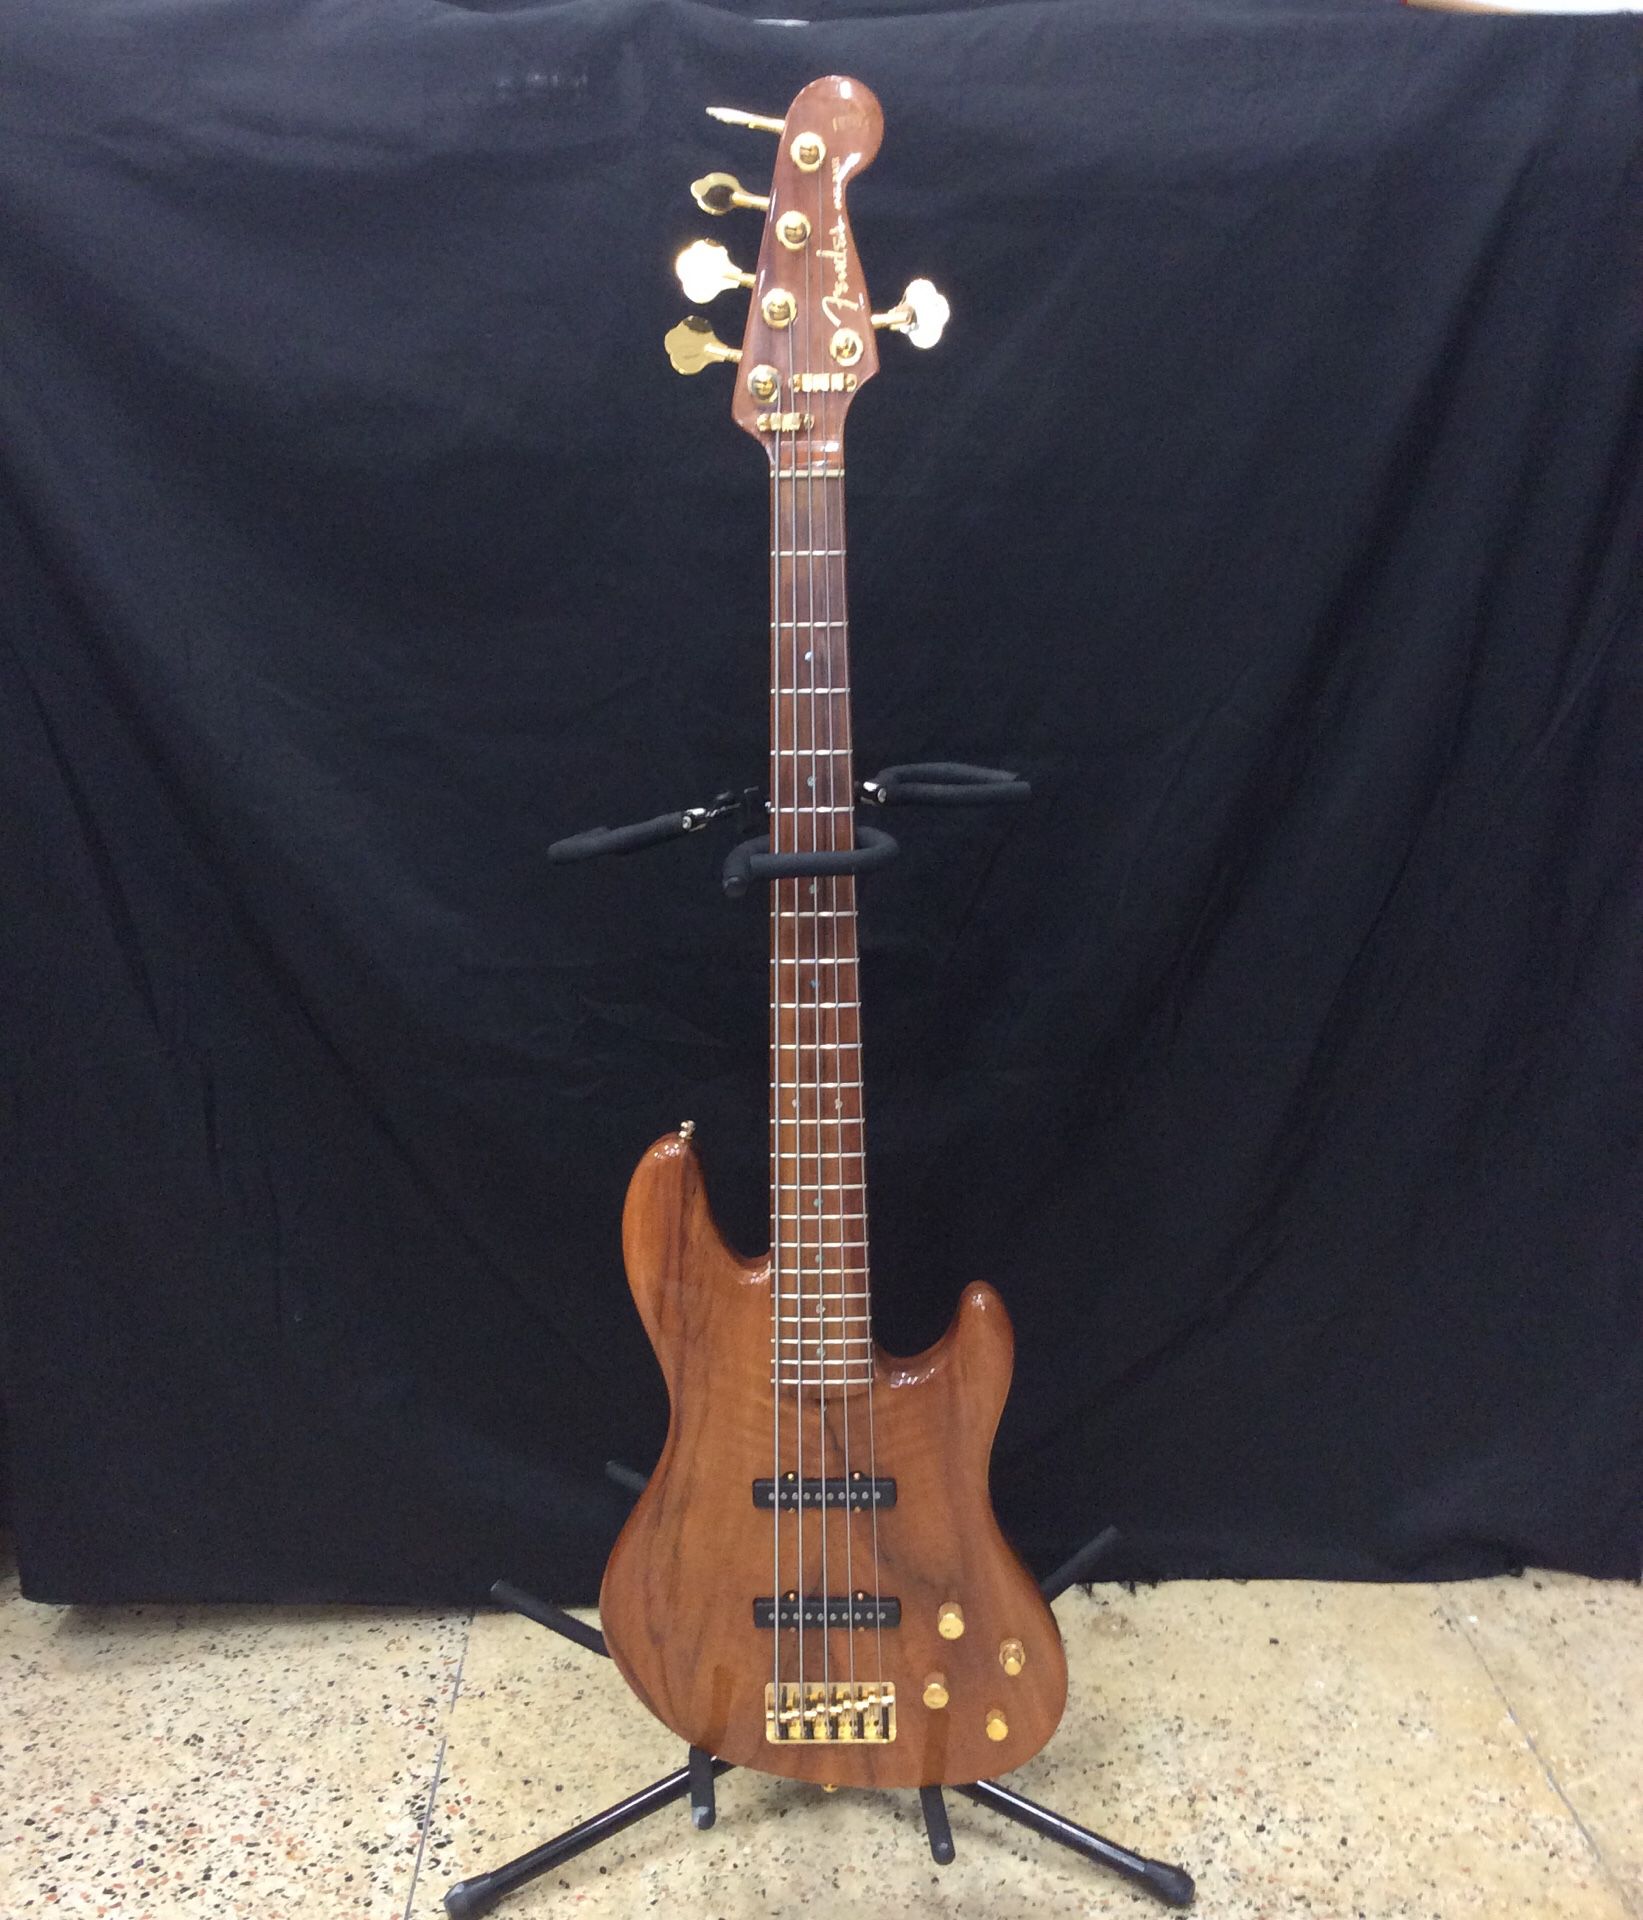 Fender Jazz Bass 5 String Bass Guitar w/ Brown Leather Case and Accssories